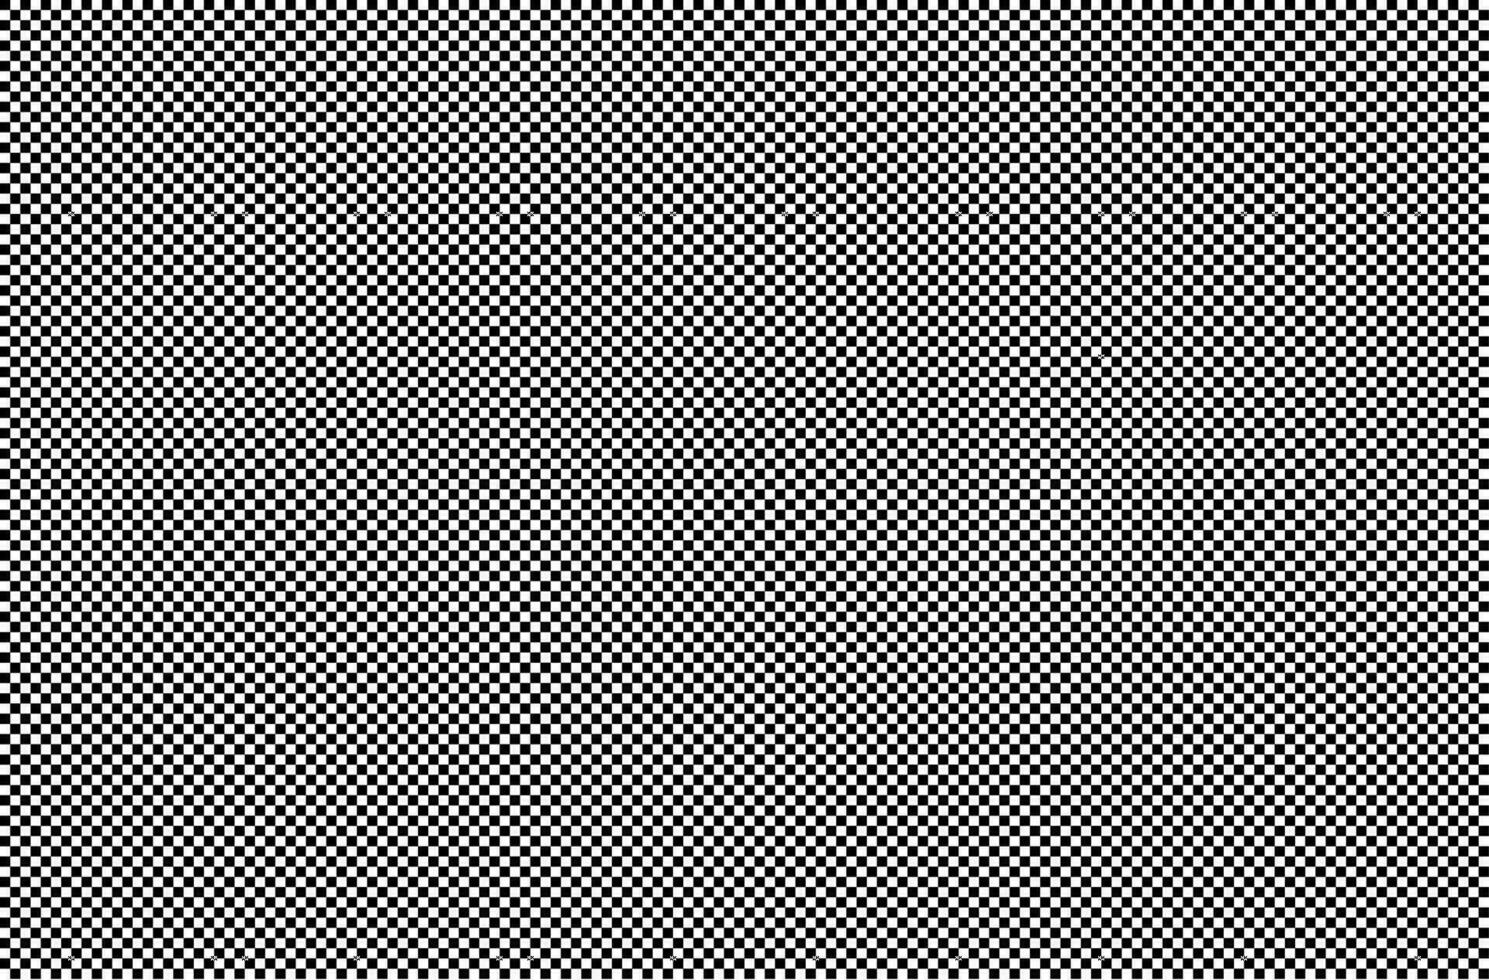 Groovy checked background. Retro black halftone. Little squared pattern. Monochrome texture for printing on badges, posters, and business cards. vector